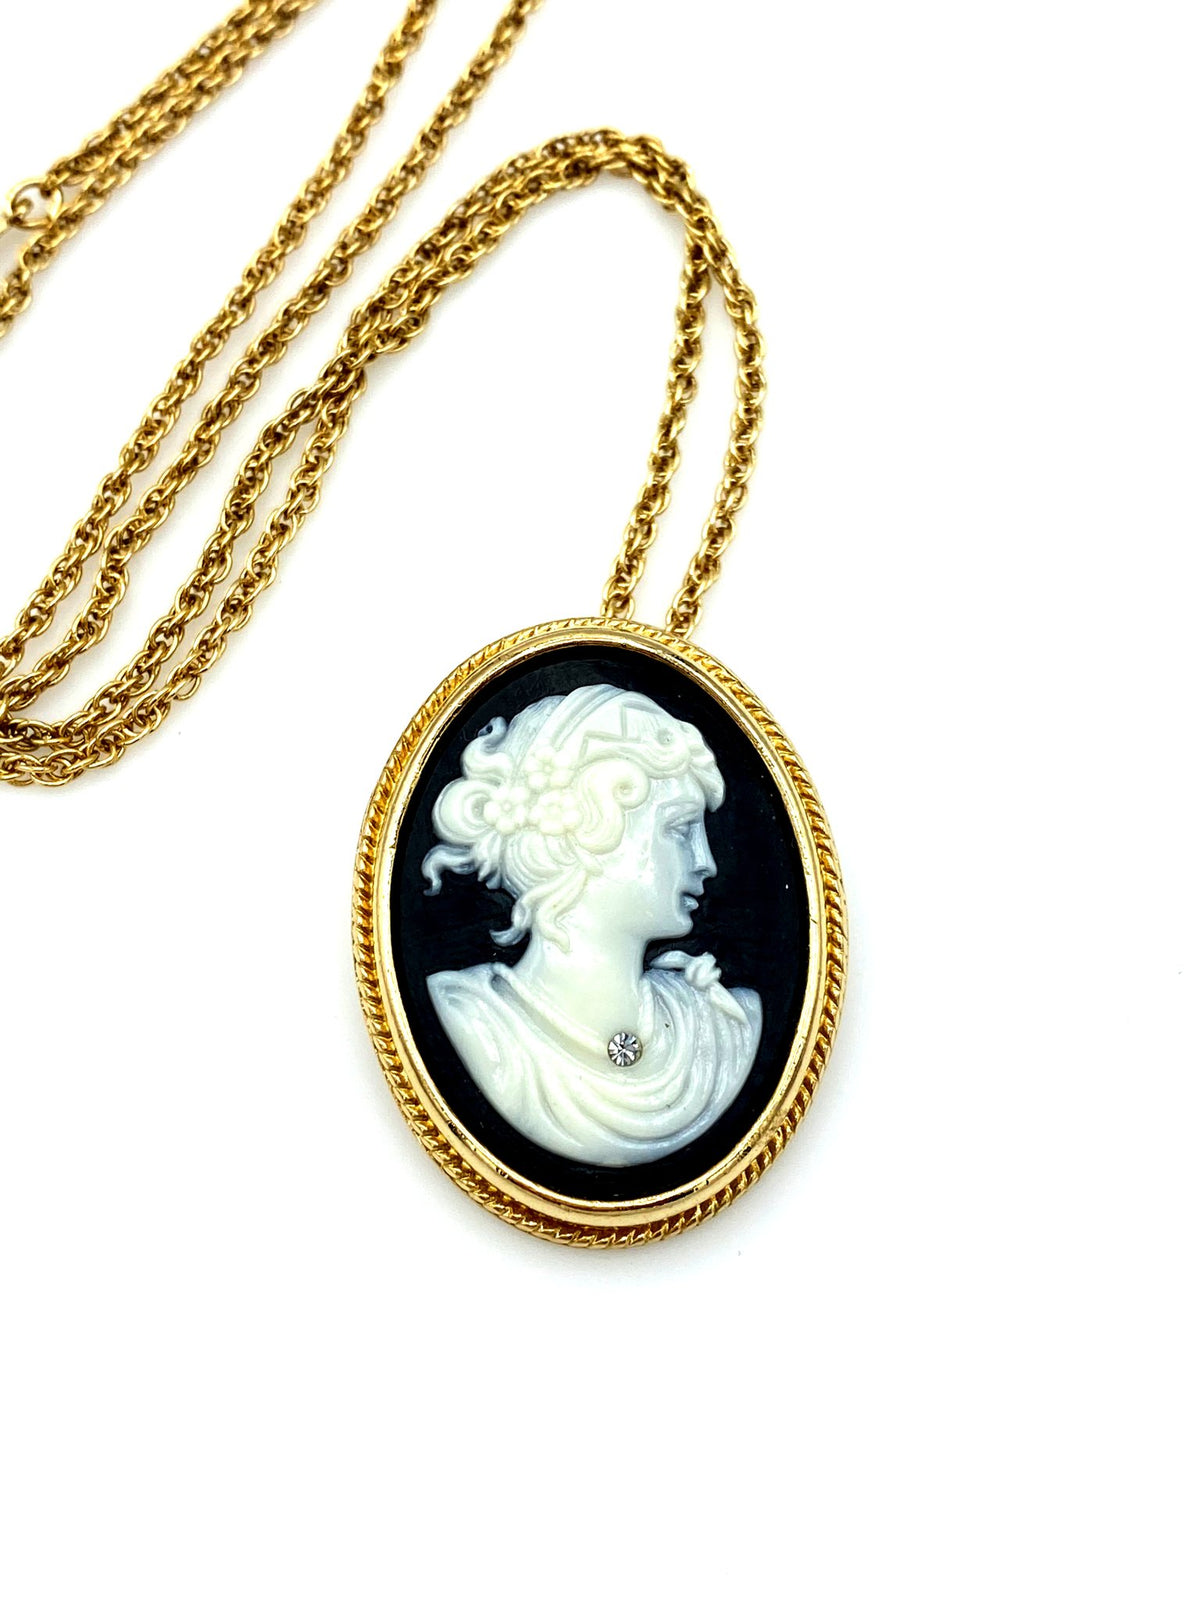 Avon Black Classic Cameo Pendant or Brooch - 24 Wishes Vintage Jewelry